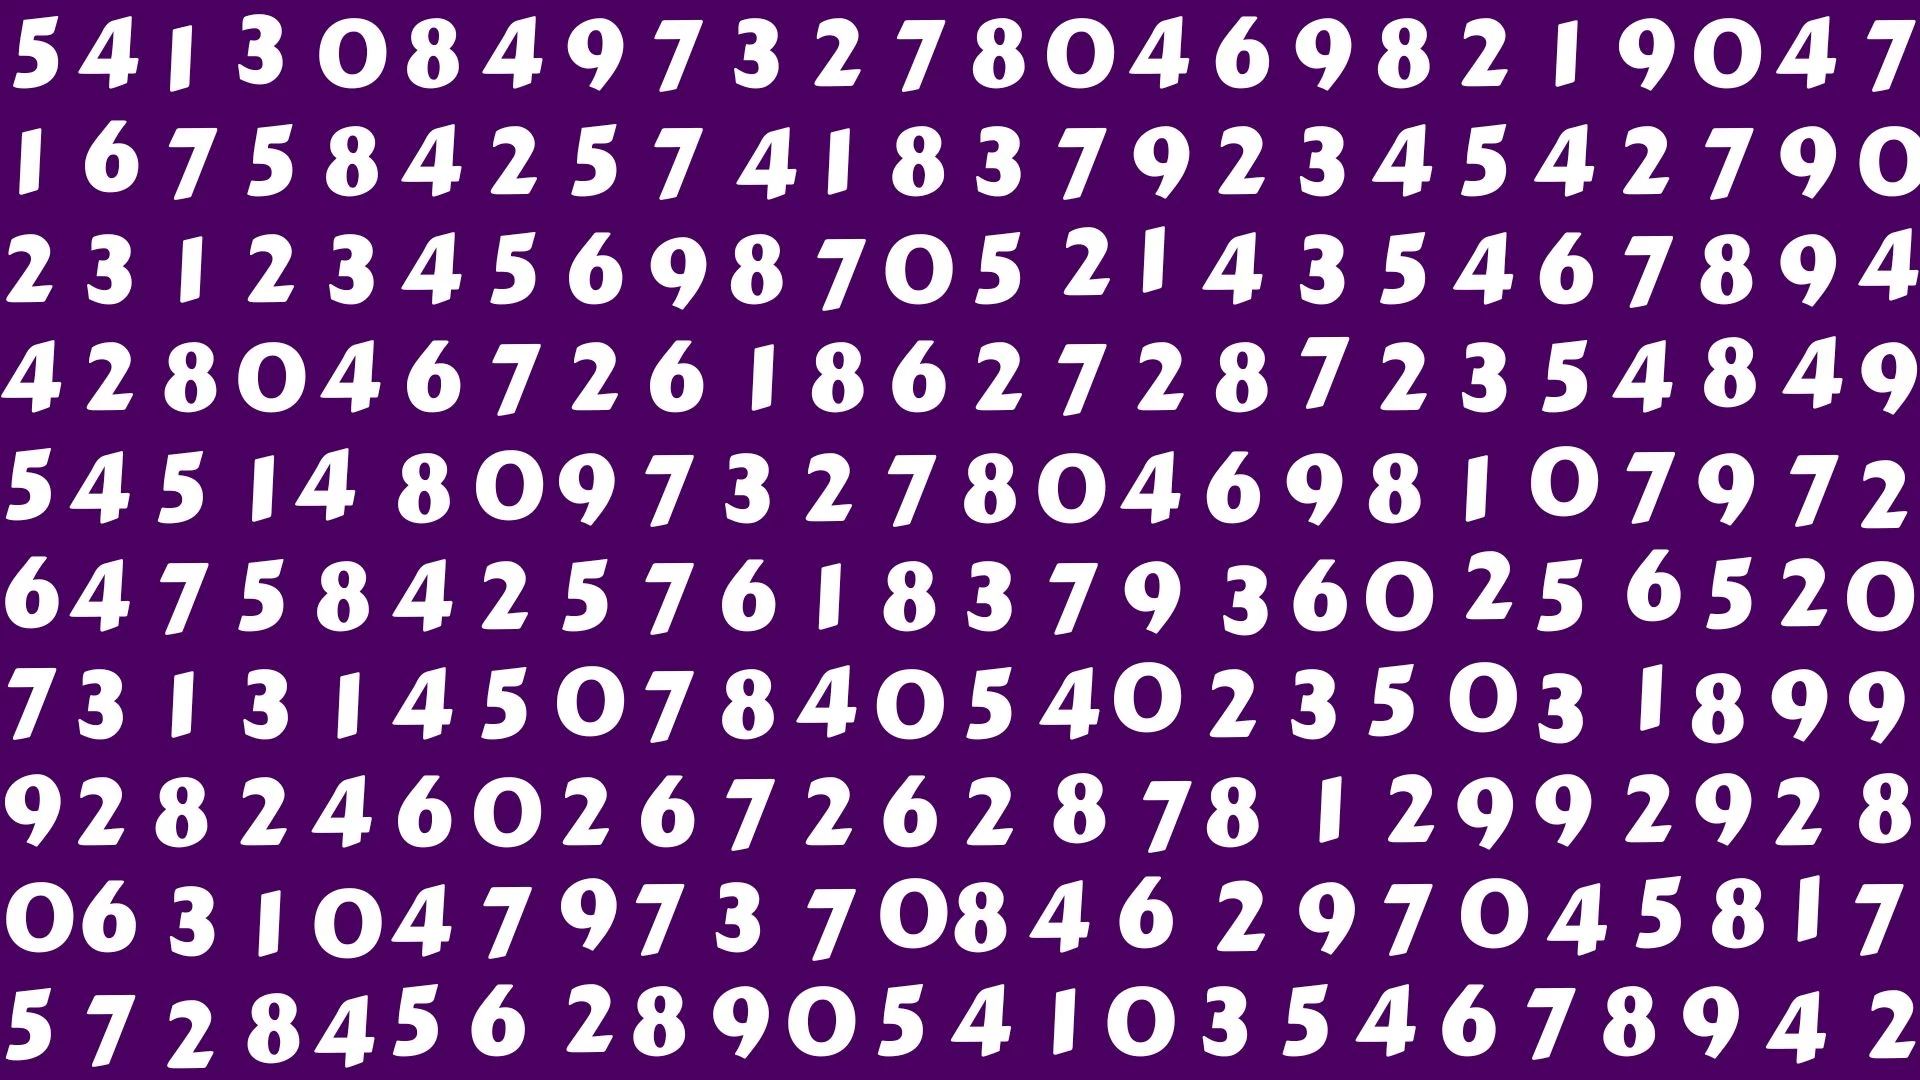 Only Detective Brains Can Spot The Number 8477 In 10 Seconds